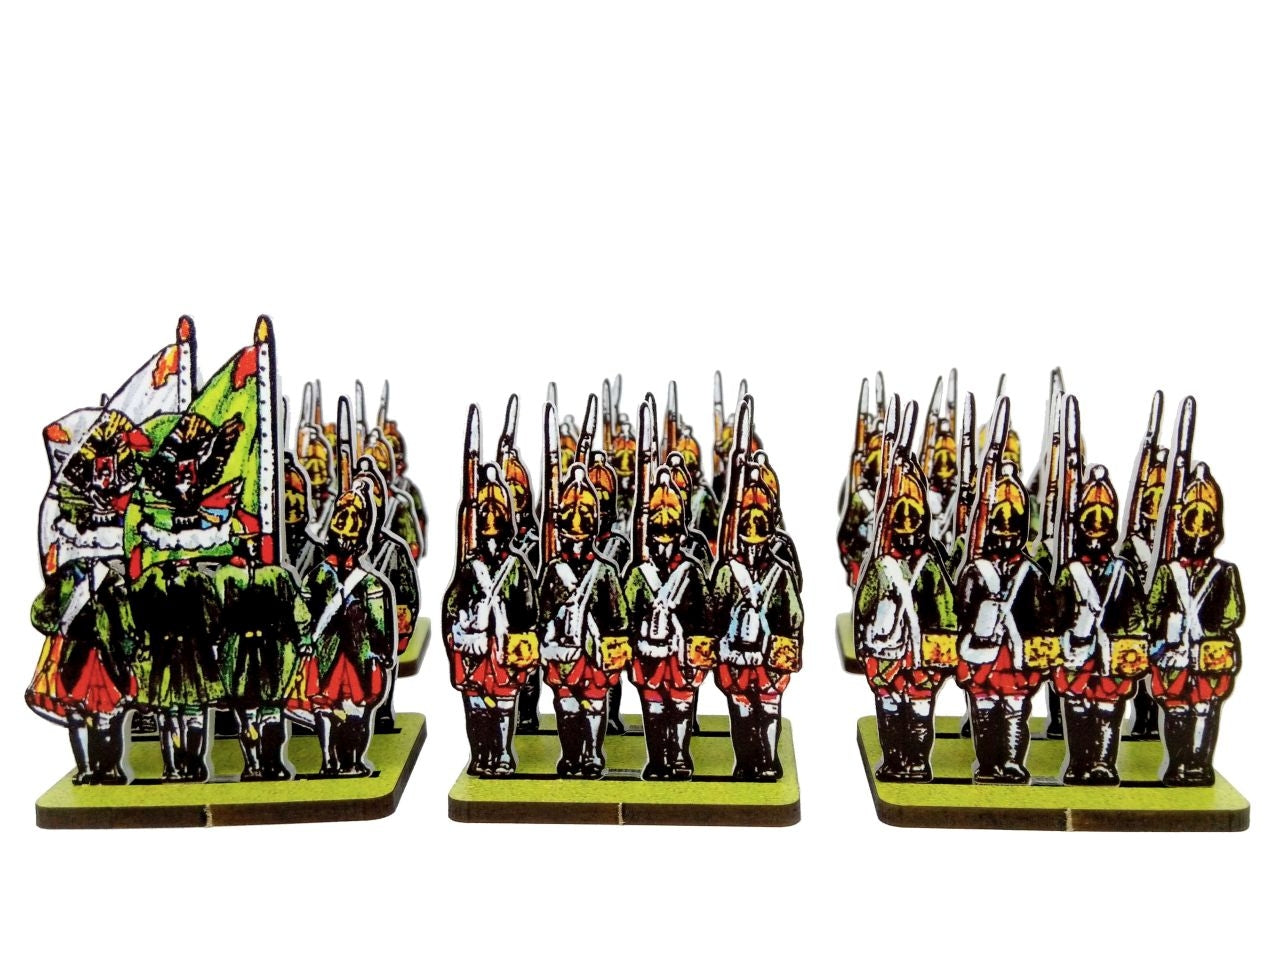 Corps of Observation Grenadiers